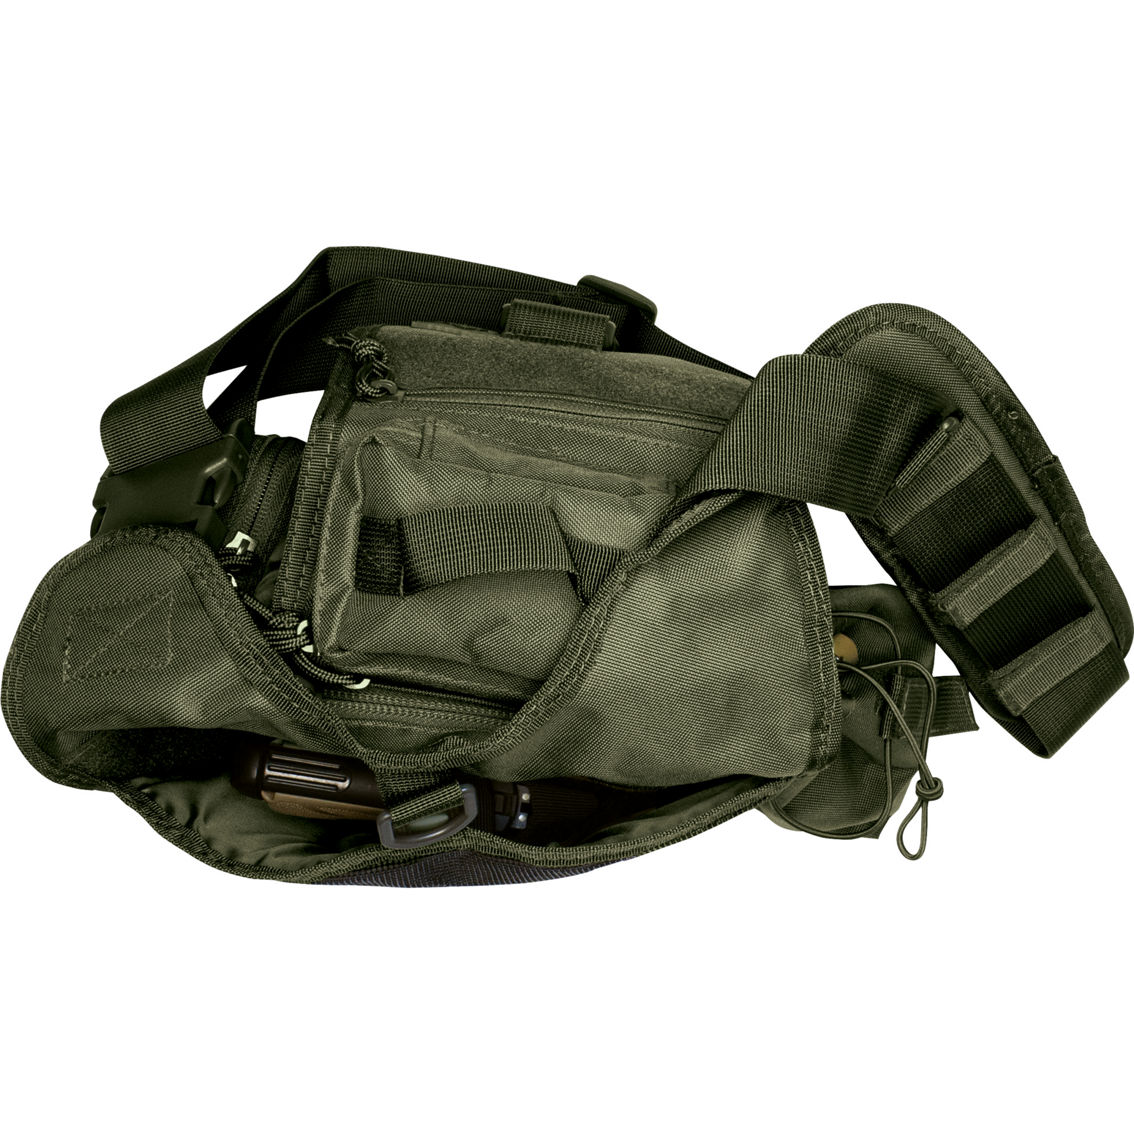 Red Rock Outdoor Gear Hipster Sling Bag - Image 4 of 6